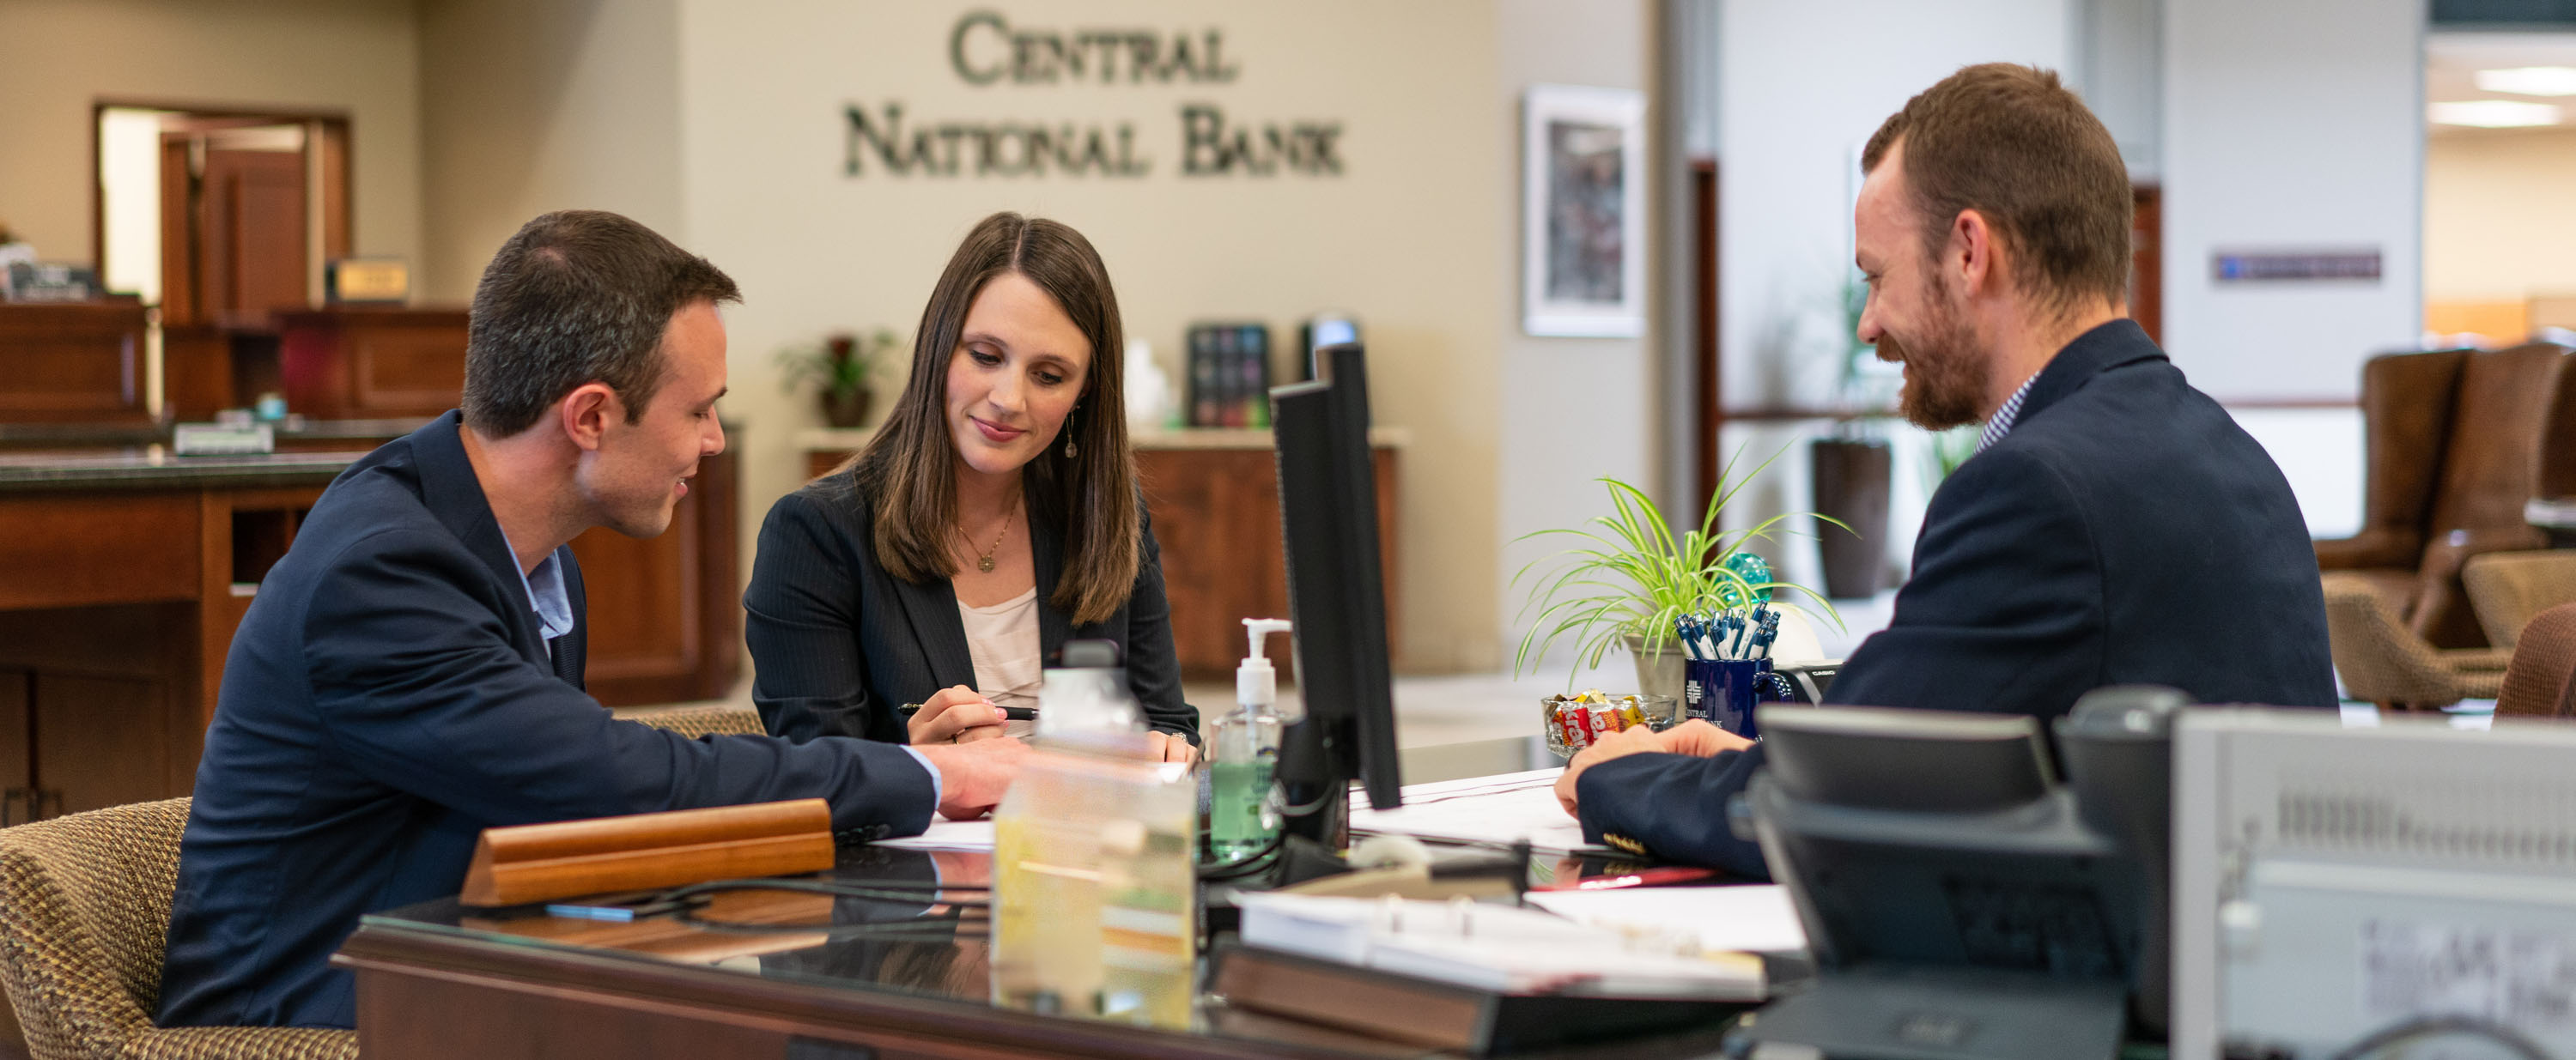 the national bank of central texas